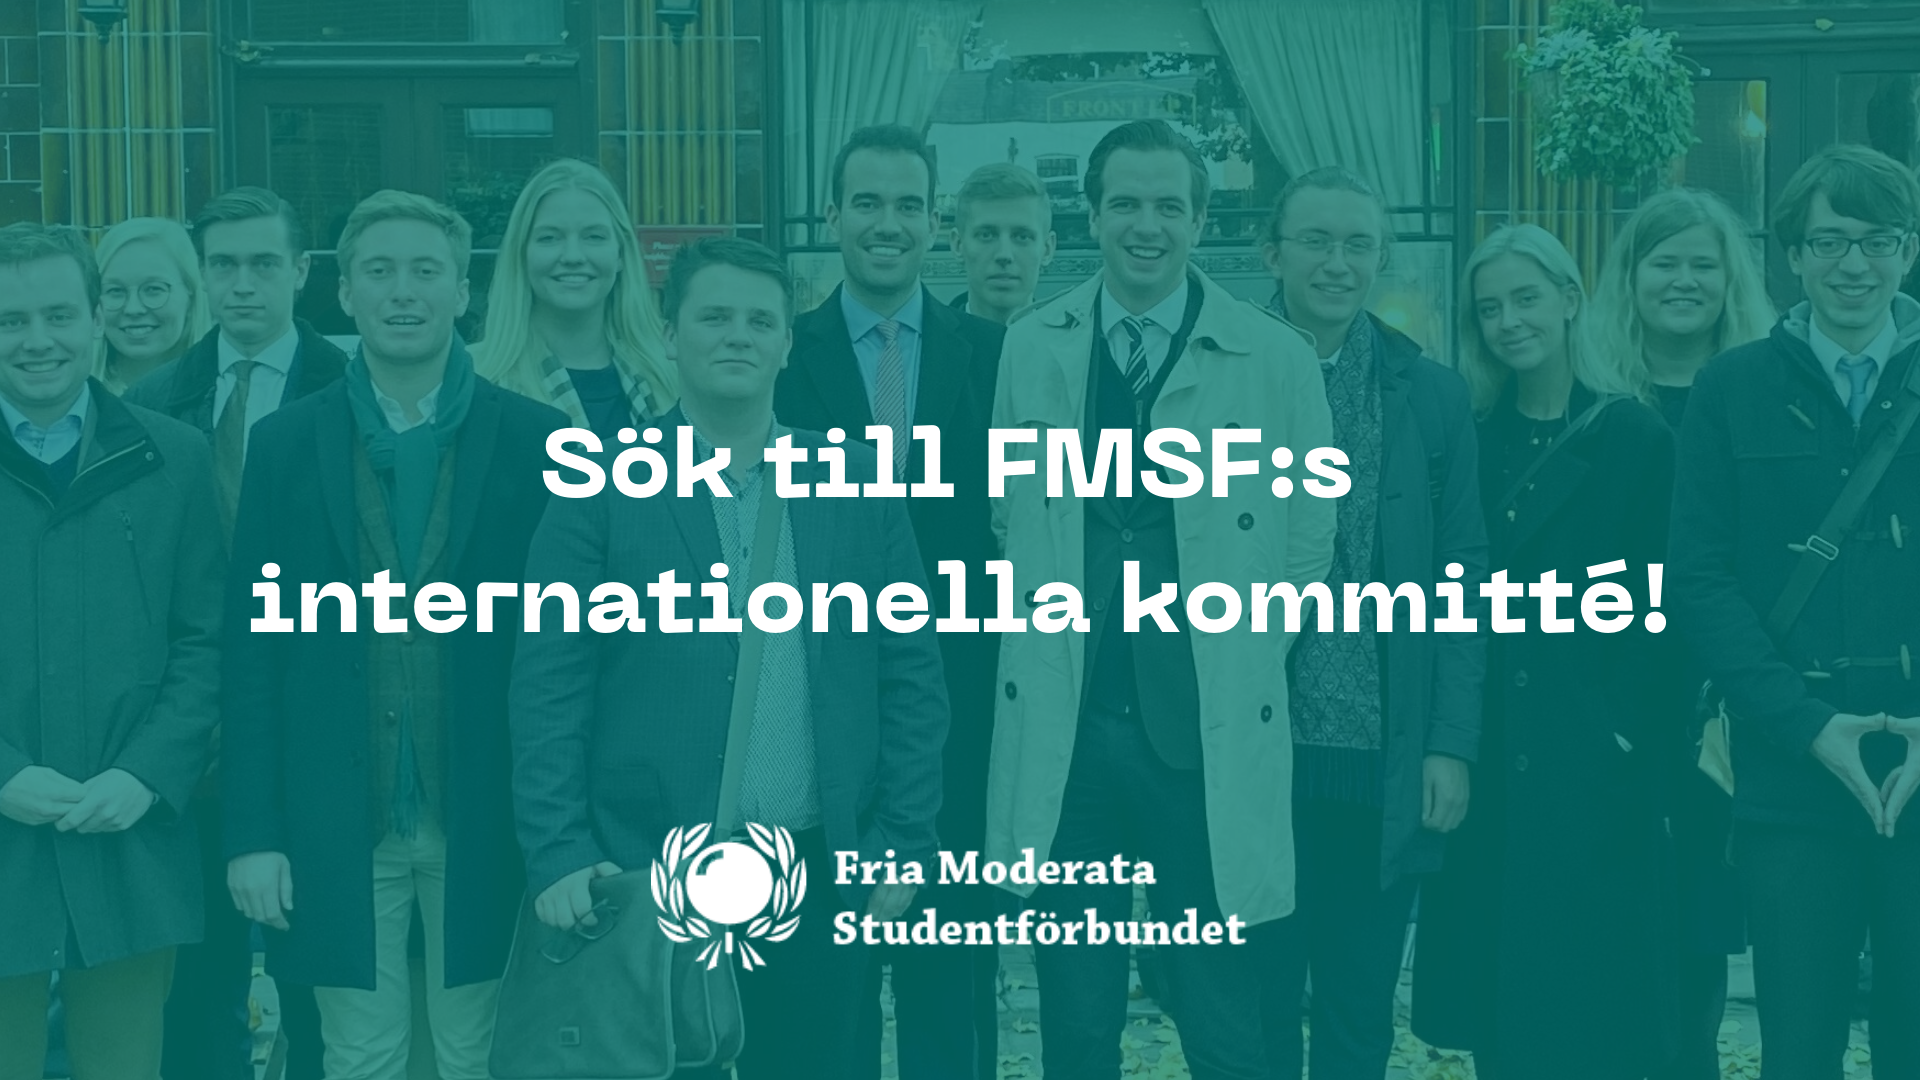 You are currently viewing Sök till FMSF:s internationella kommitté!